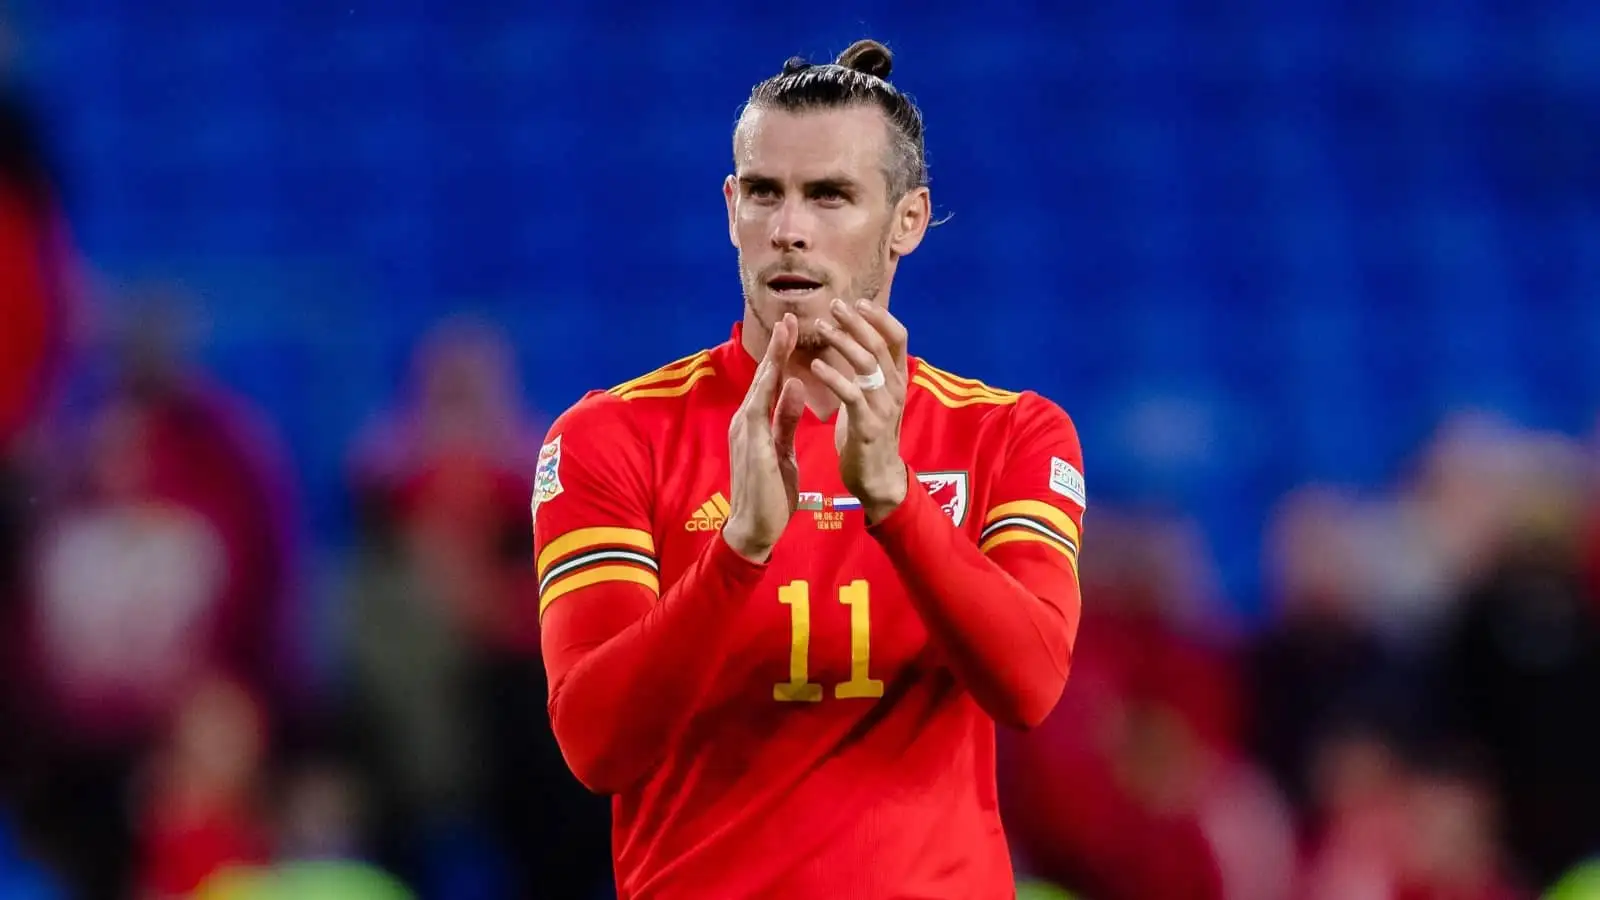 LAFC announce Gareth Bale signing, as coach anticipates ‘invaluable’ impact Wales legend will have